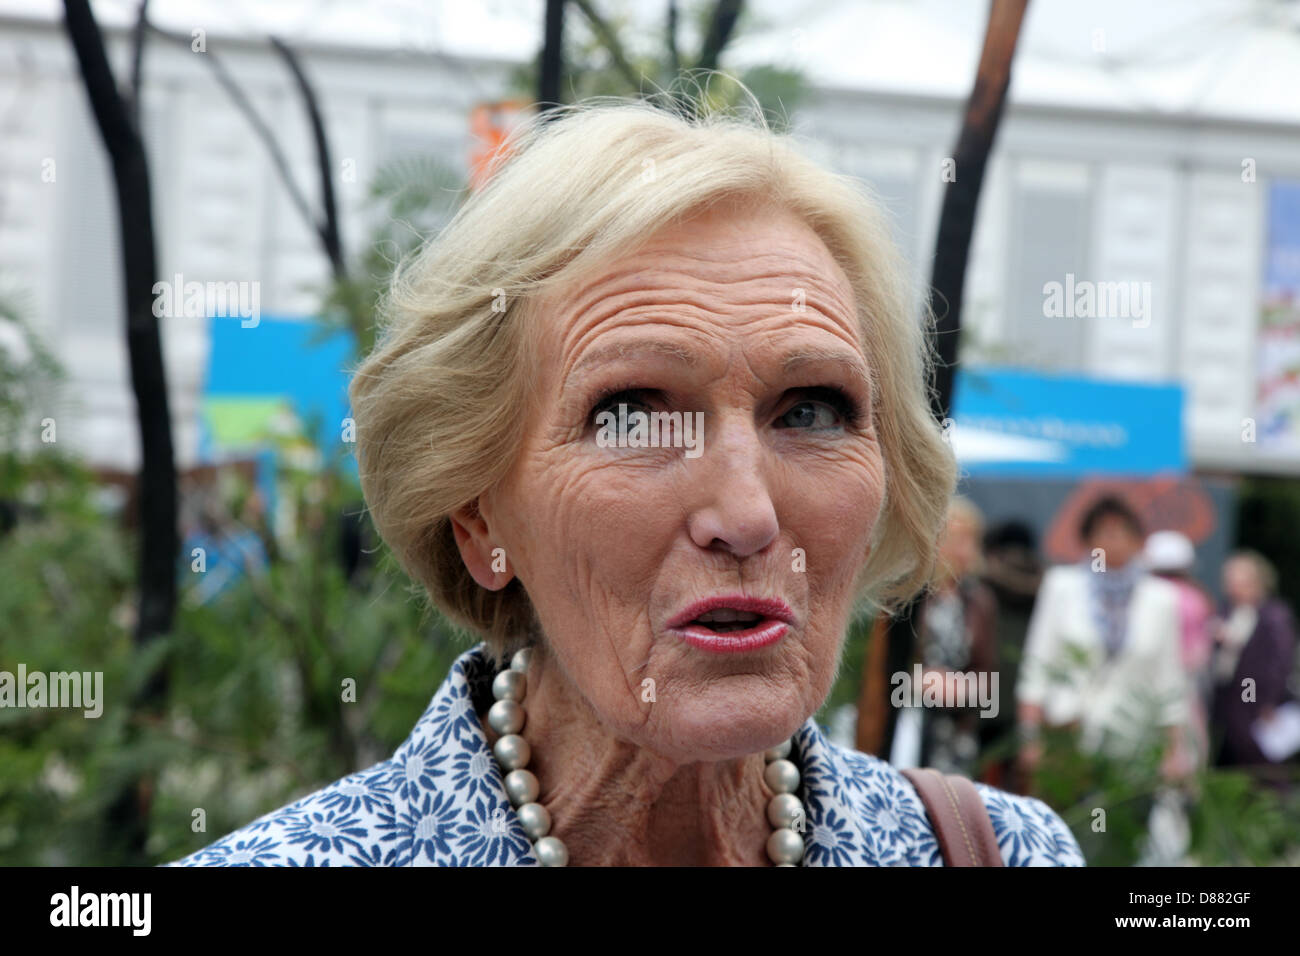 Mary Berry, British food writer and TV presenter at the RHS Chelsea Flower Show 2013 Stock Photo